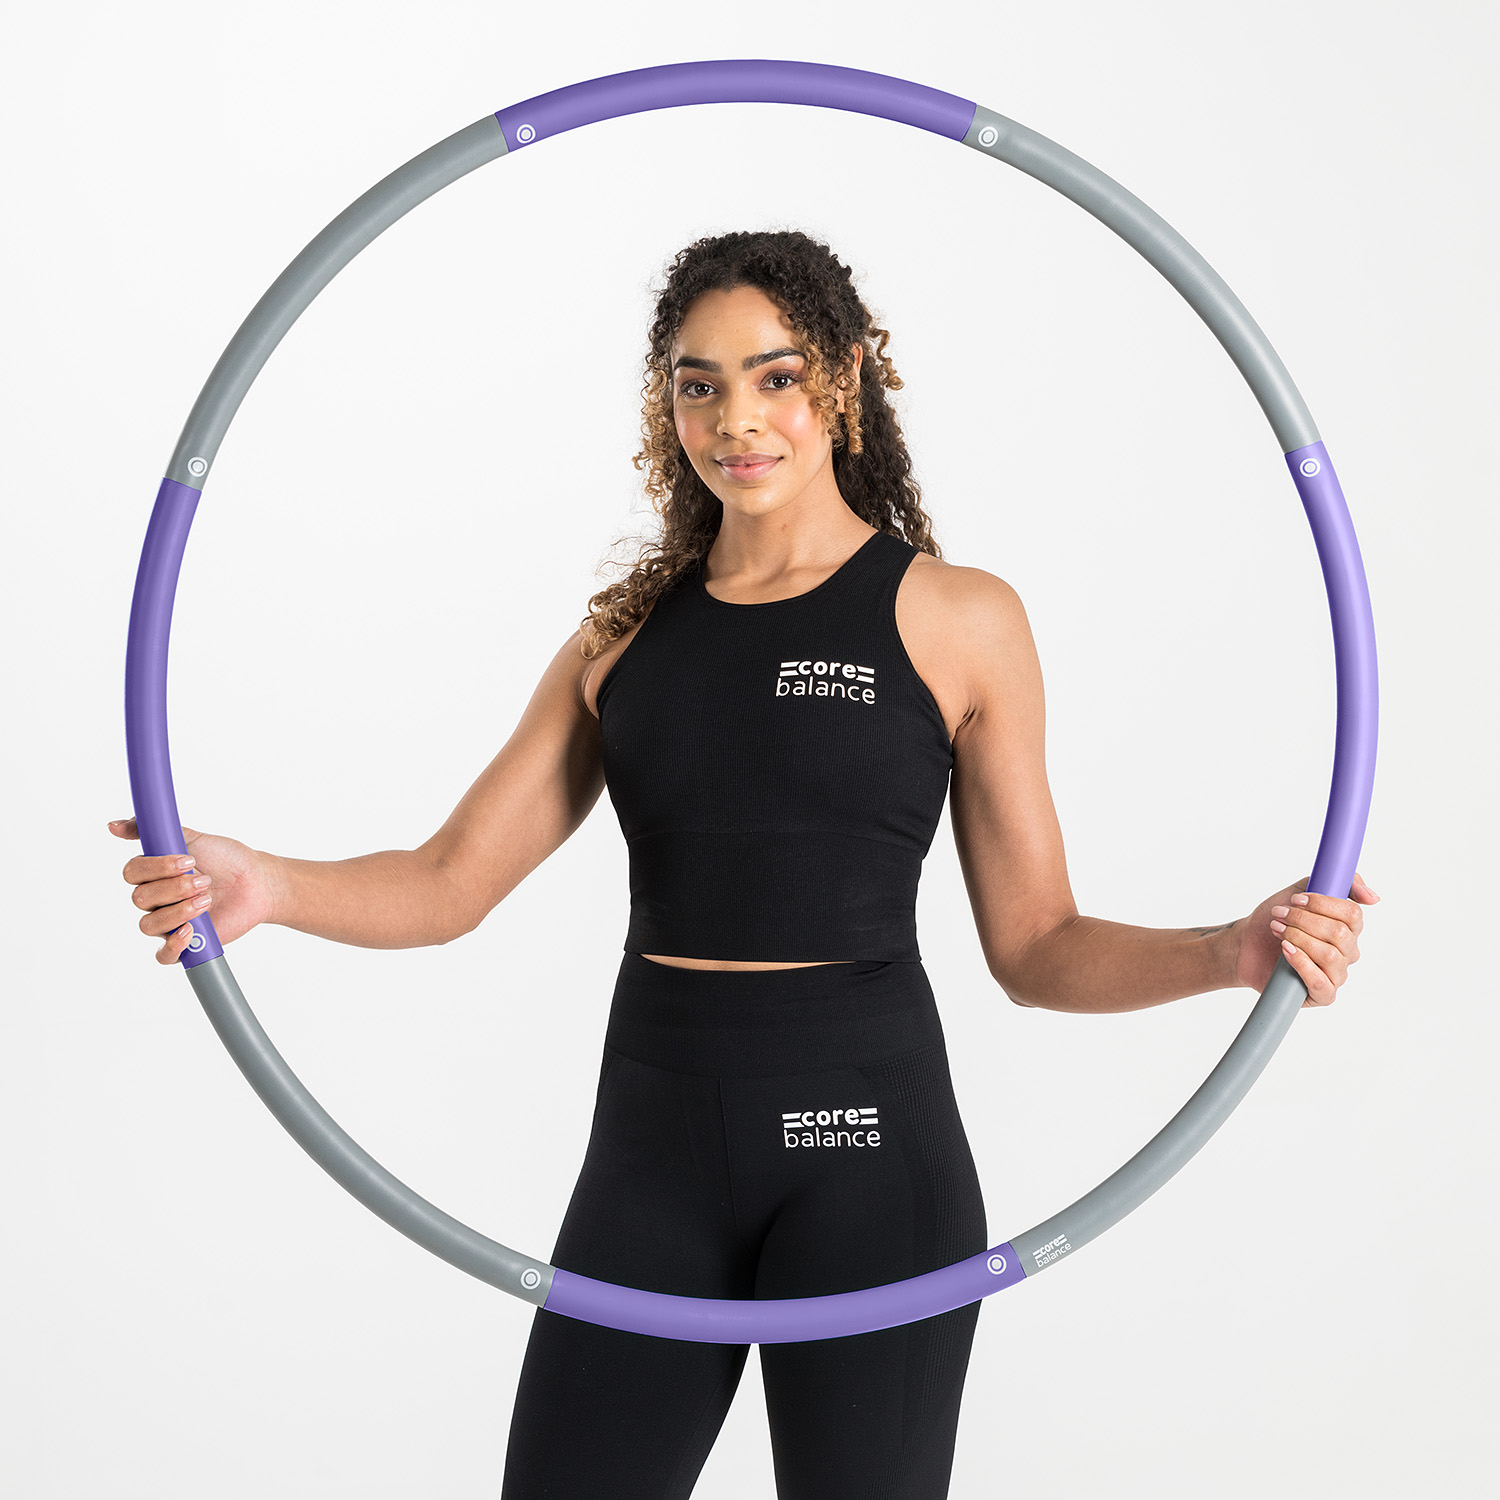 Professional Adjustable Soft Hula Hoop for Adults-2.2 lb Gray Pink Loss Weight by Fun Way for Woman 8 Section Detachable Design Fast Fat Burning Workout Weighted Exercise Fitness Hoop Man 